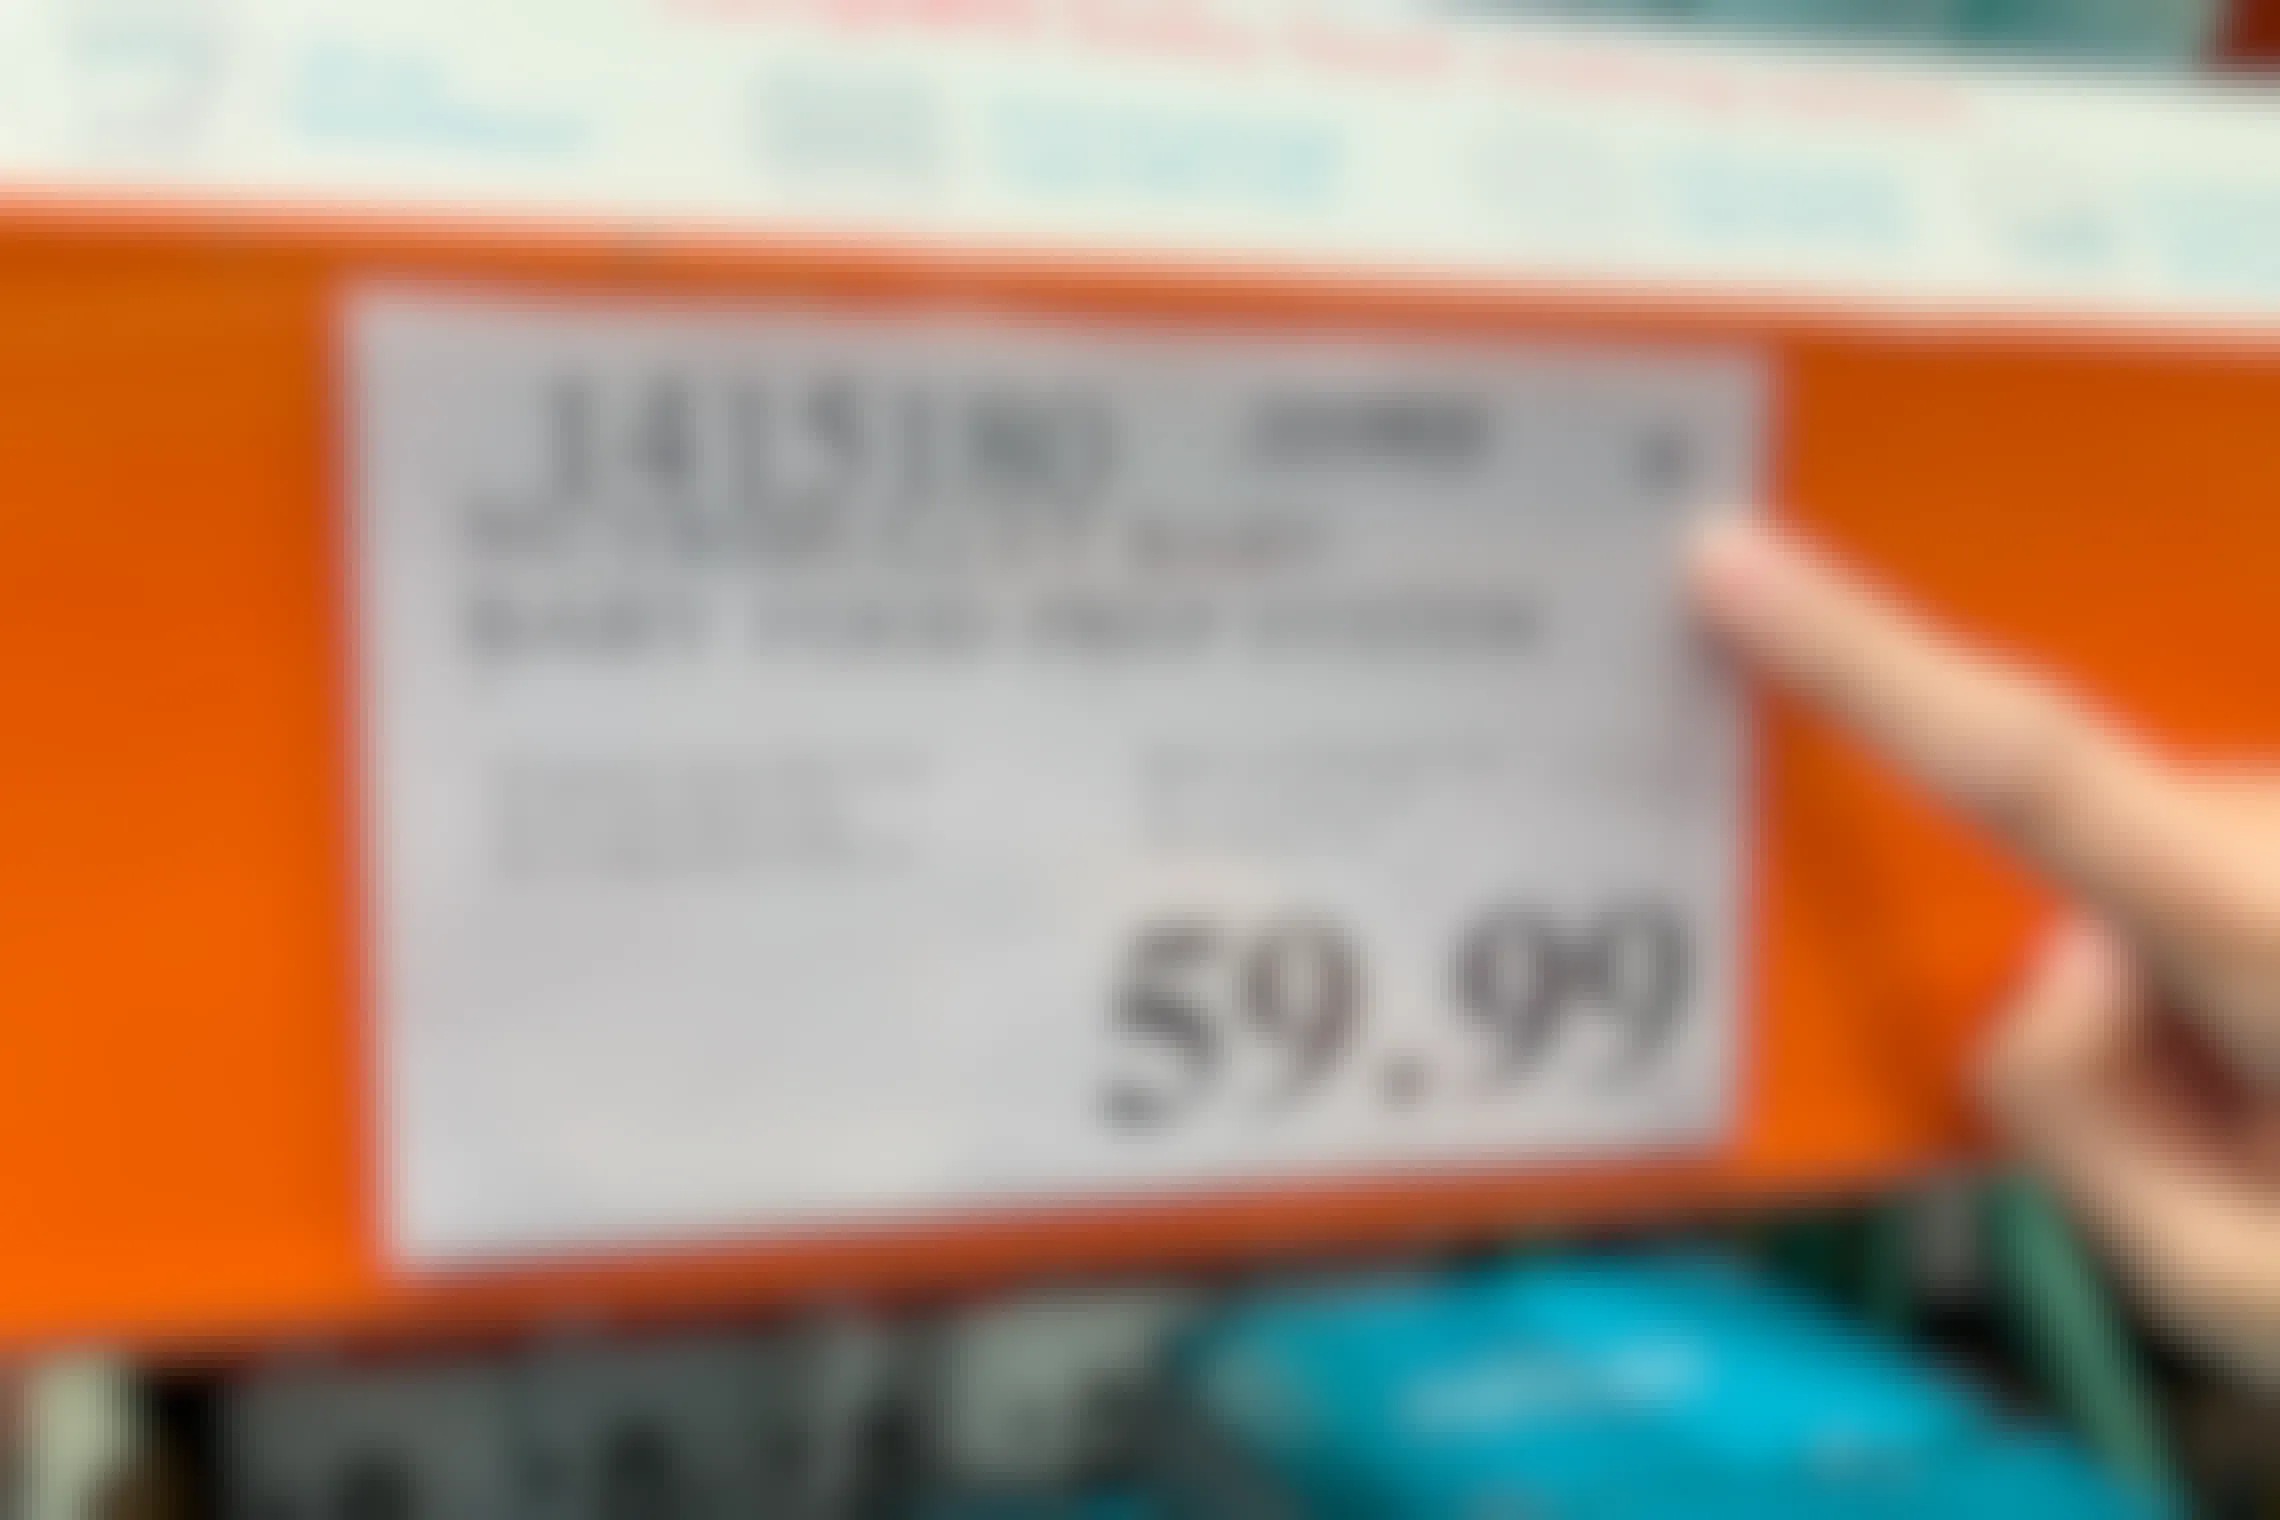 Person pointing out Asterisk on a price tag at Costco